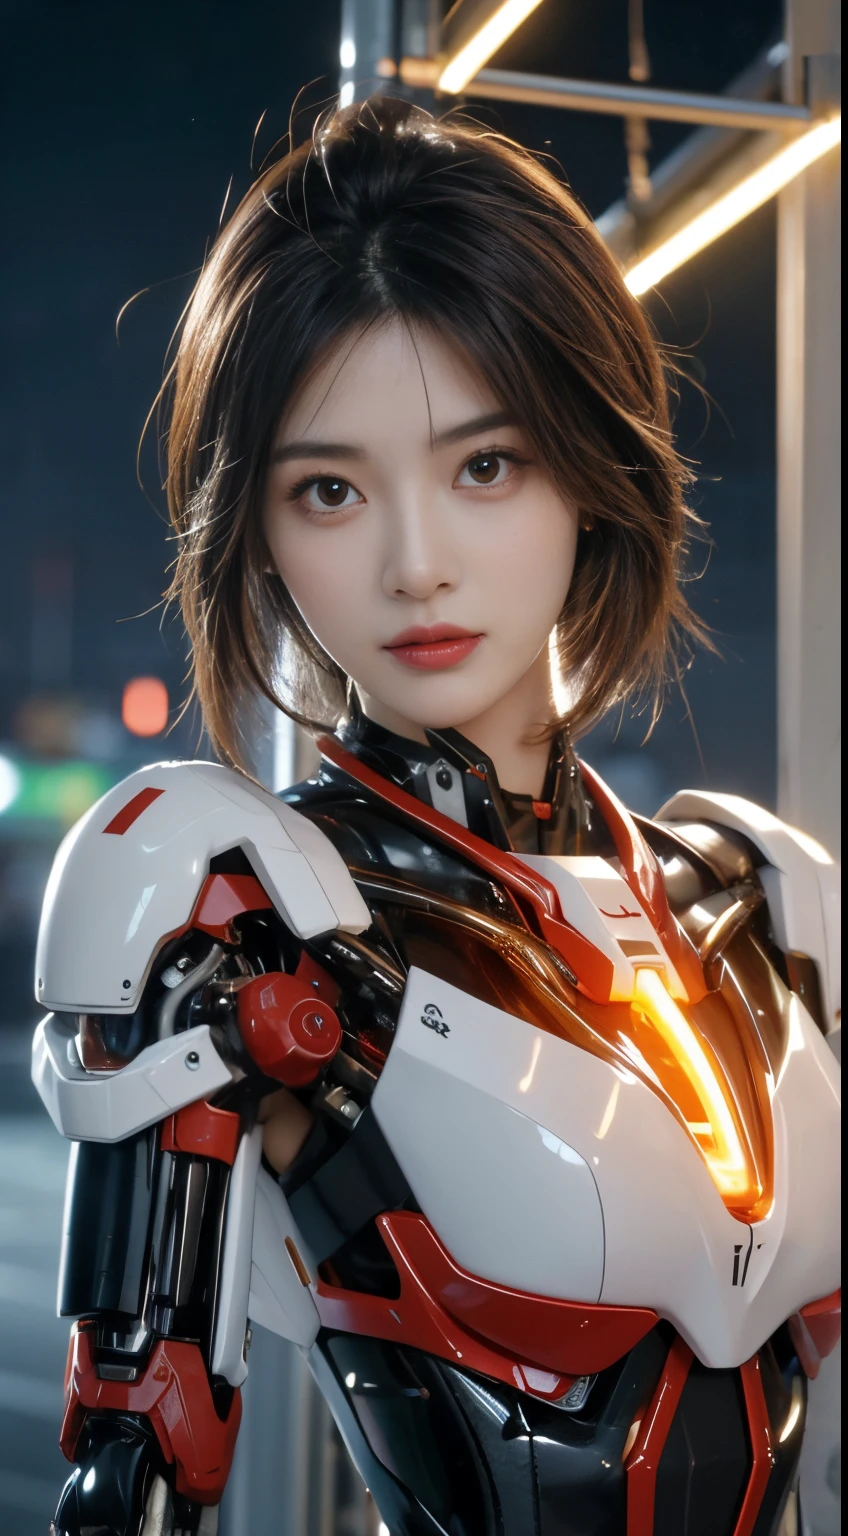 (1 Mechanical Girl)、top-quality、​masterpiece、超A high resolution、(Photorealsitic:1.4)、Raw photo、女の子1人、Golden hair、glowy skin、(((1 Mechanical Girl)))、（LED Lamp Mechanical Helmet）、(Small LED)、((super realistic details))、portlate、globalillumination、Shadow、octan render、8K、ultrasharp、Colossal 、Raw skin is exposed in cleavage、metals、Details of complex ornaments、Japan details、highly intricate detail、Realistic light、CGSoation Trends、Red Eyes、radiant eyes、Facing the camera、neon detailechanical limbs)、(blood vessels connected to tubeechanical vertebrae attached to the back、mechanical cervical attaching to neck、(Wires and cables connecting to the head)、Gundam、Small LED、,Mechanical thighs、Toostock、